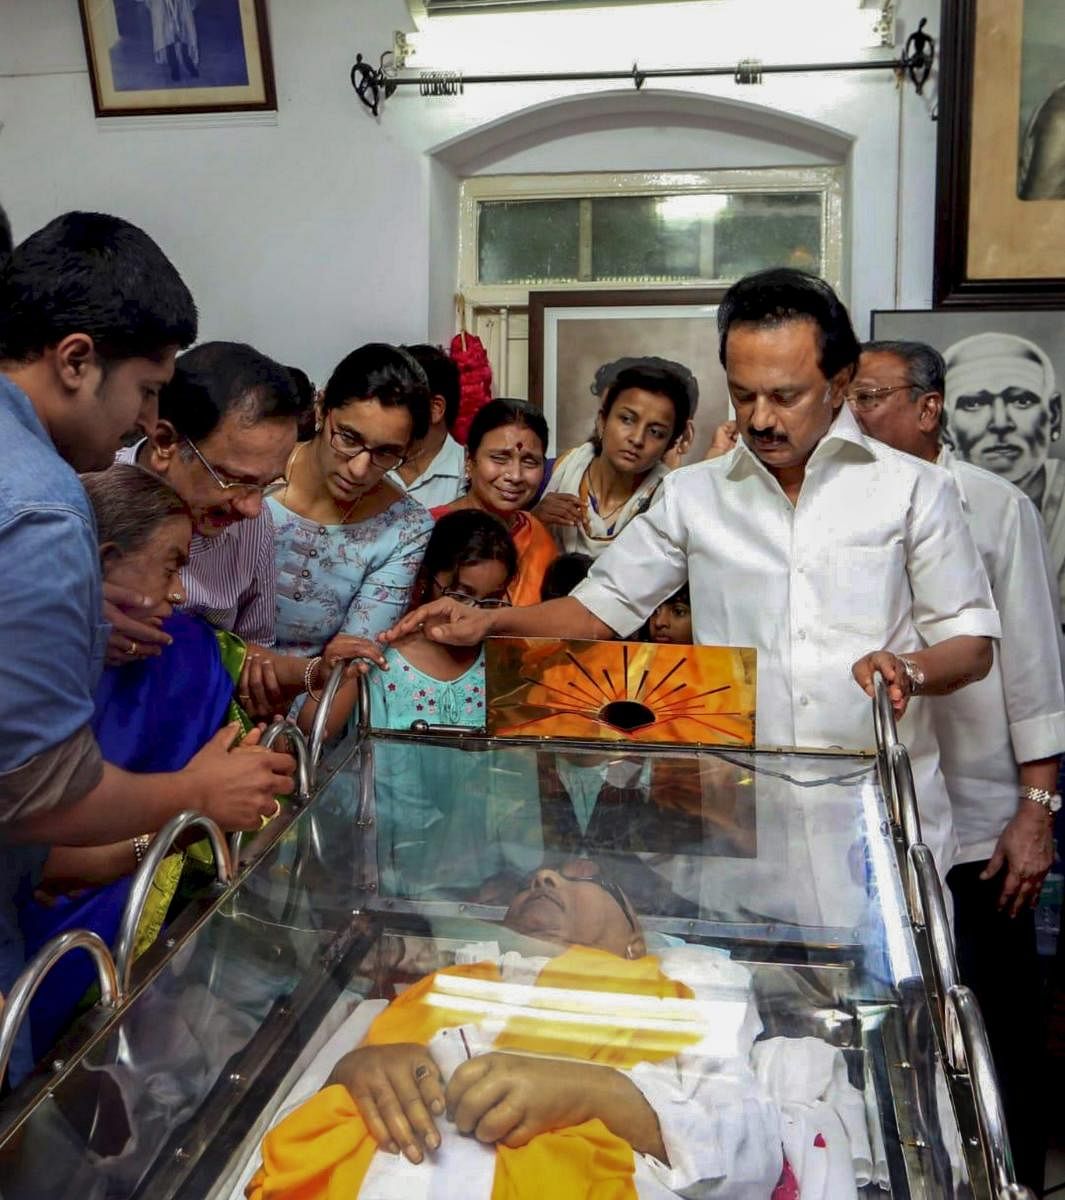 Chennai: DMK leader MK Stalin stands alongside the mortal remains of his father and DMK chief M Karunanidhi, in Chennai on Wednesday, Aug. 08, 2018. Karunanidhi died yesterday after a prolonged illness, in the city hospital where the leader was admitted.